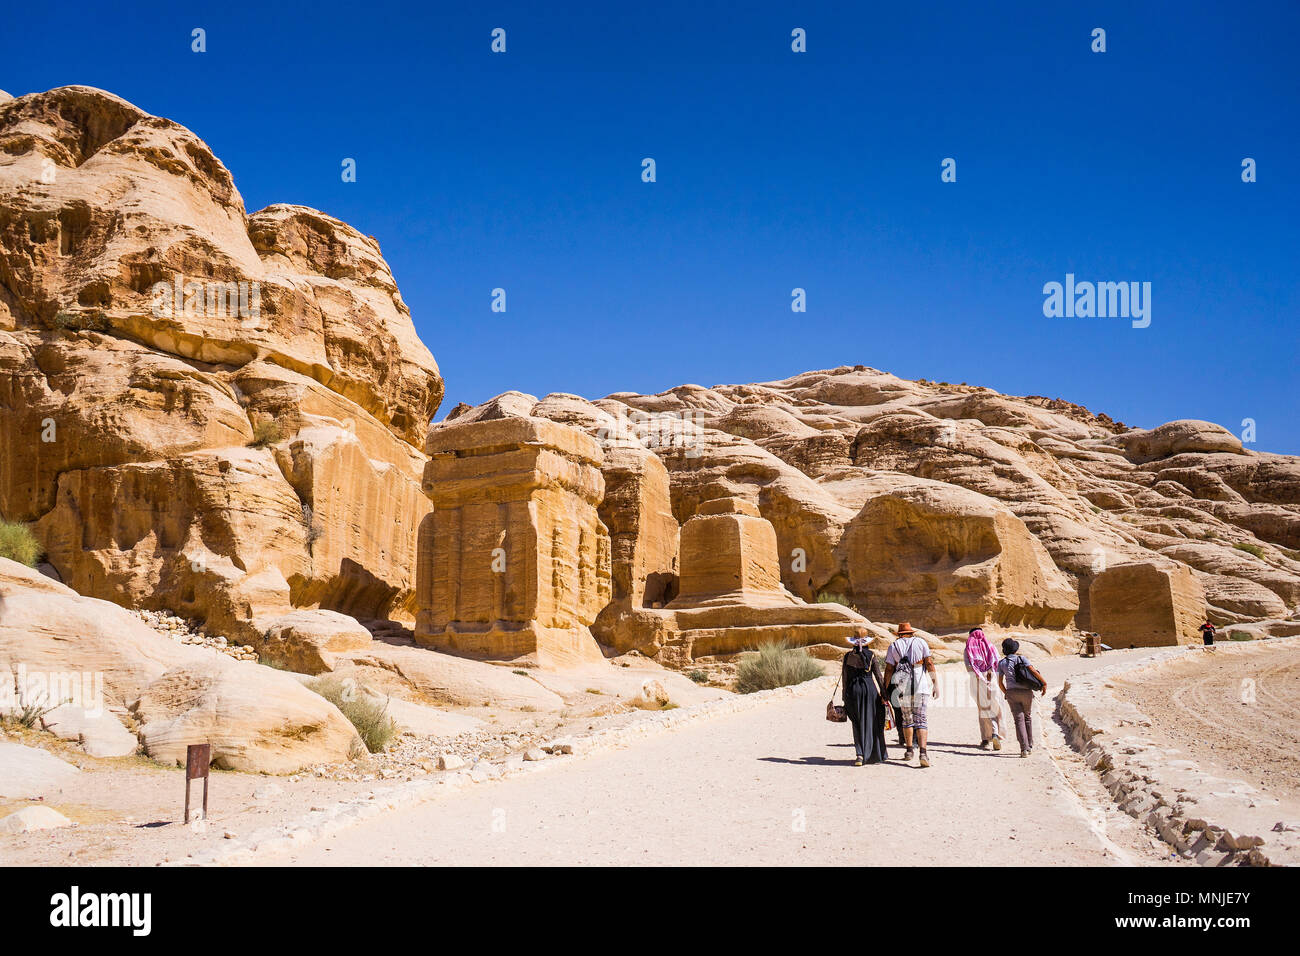 Tourists walking on footpath in Petra with tombs and temples carved in sandstone, Wadi Musa, Maan Governorate, Jordan Stock Photo